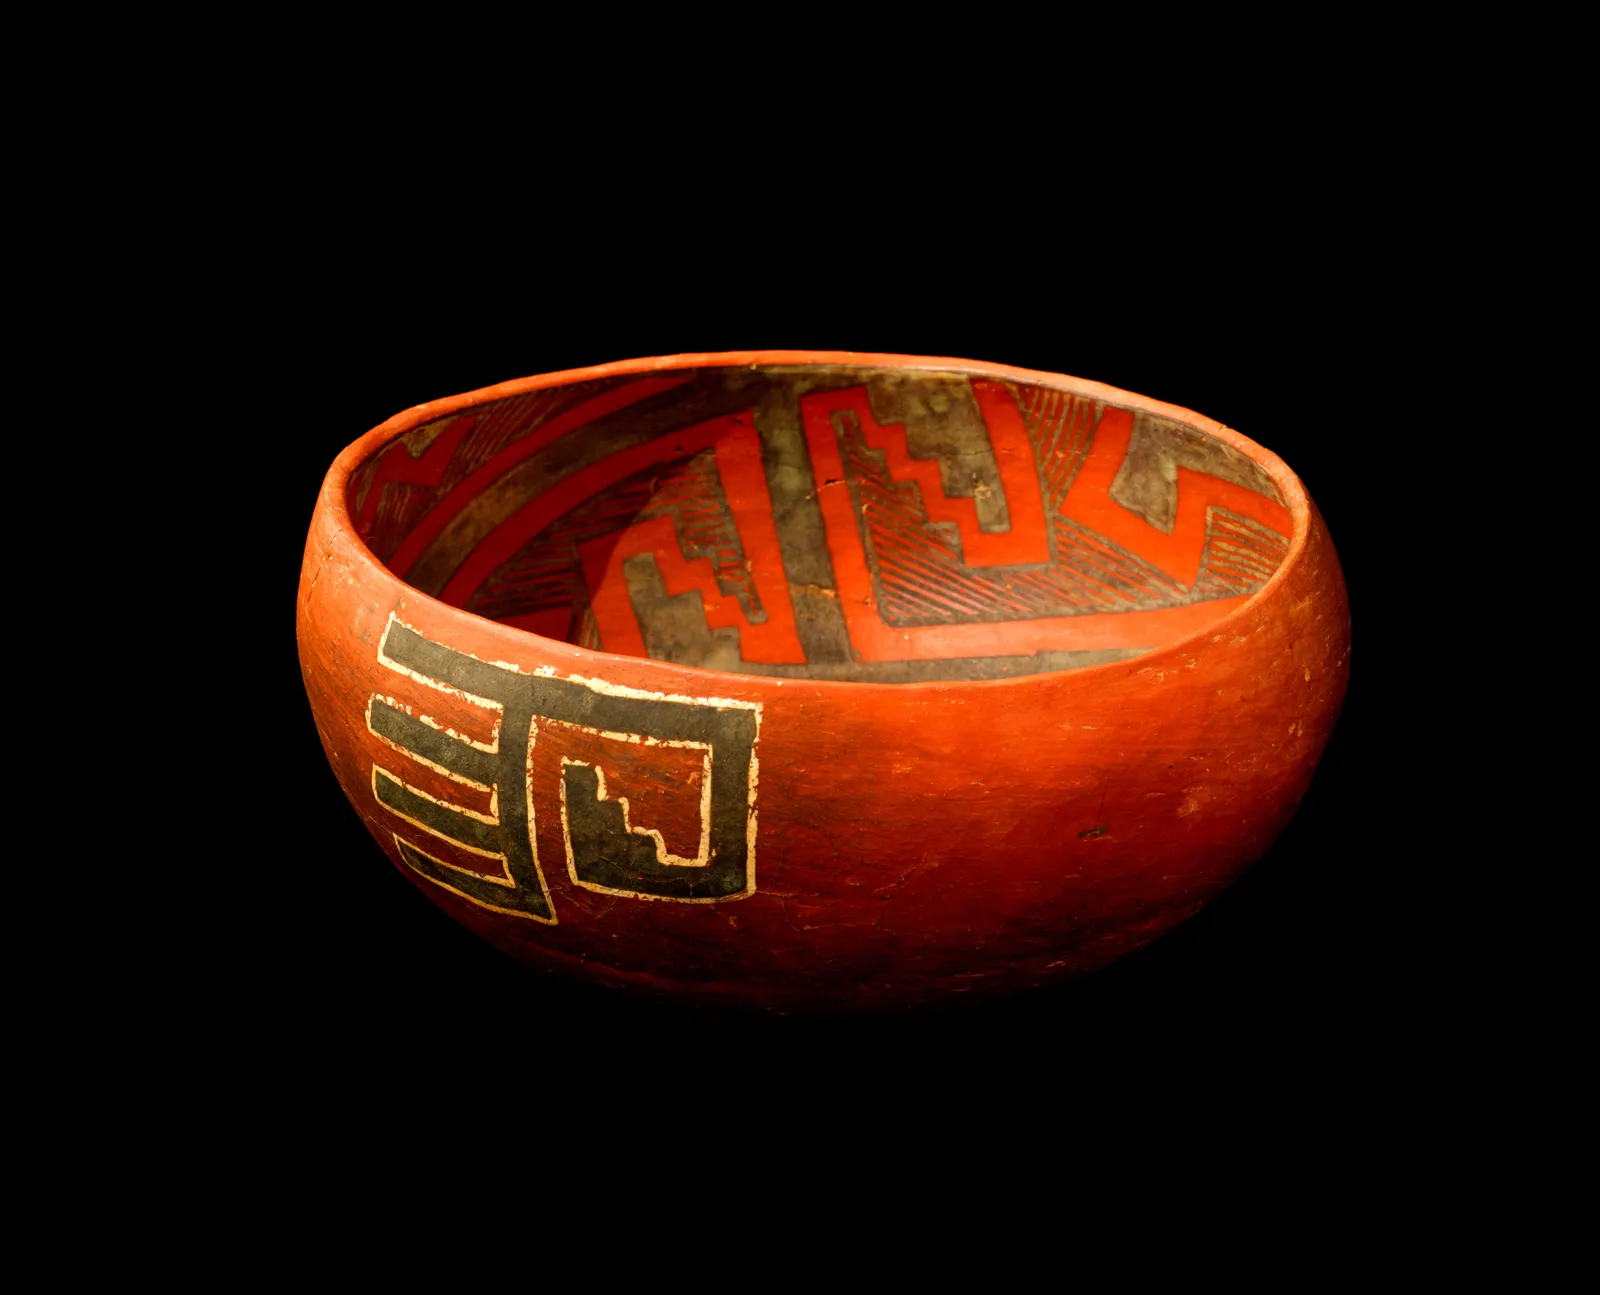  A red and black bowl with geometric designs painted on it is believed to bring good luck.